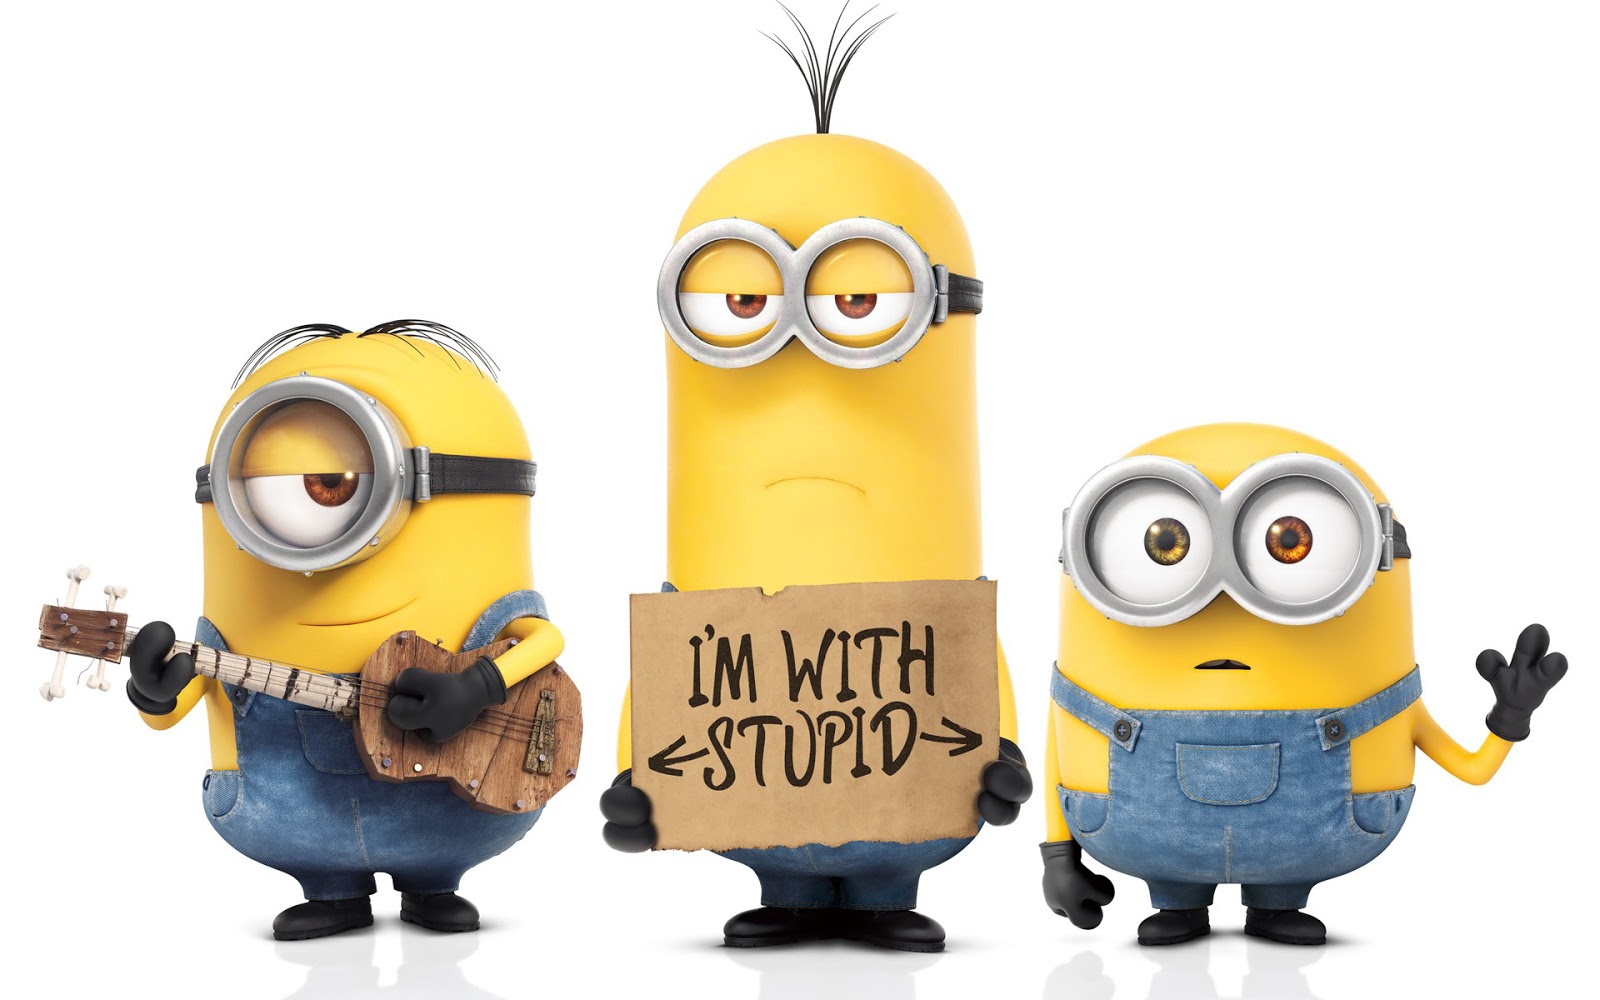 MOVIES: Despicable Me 3 - News Roundup